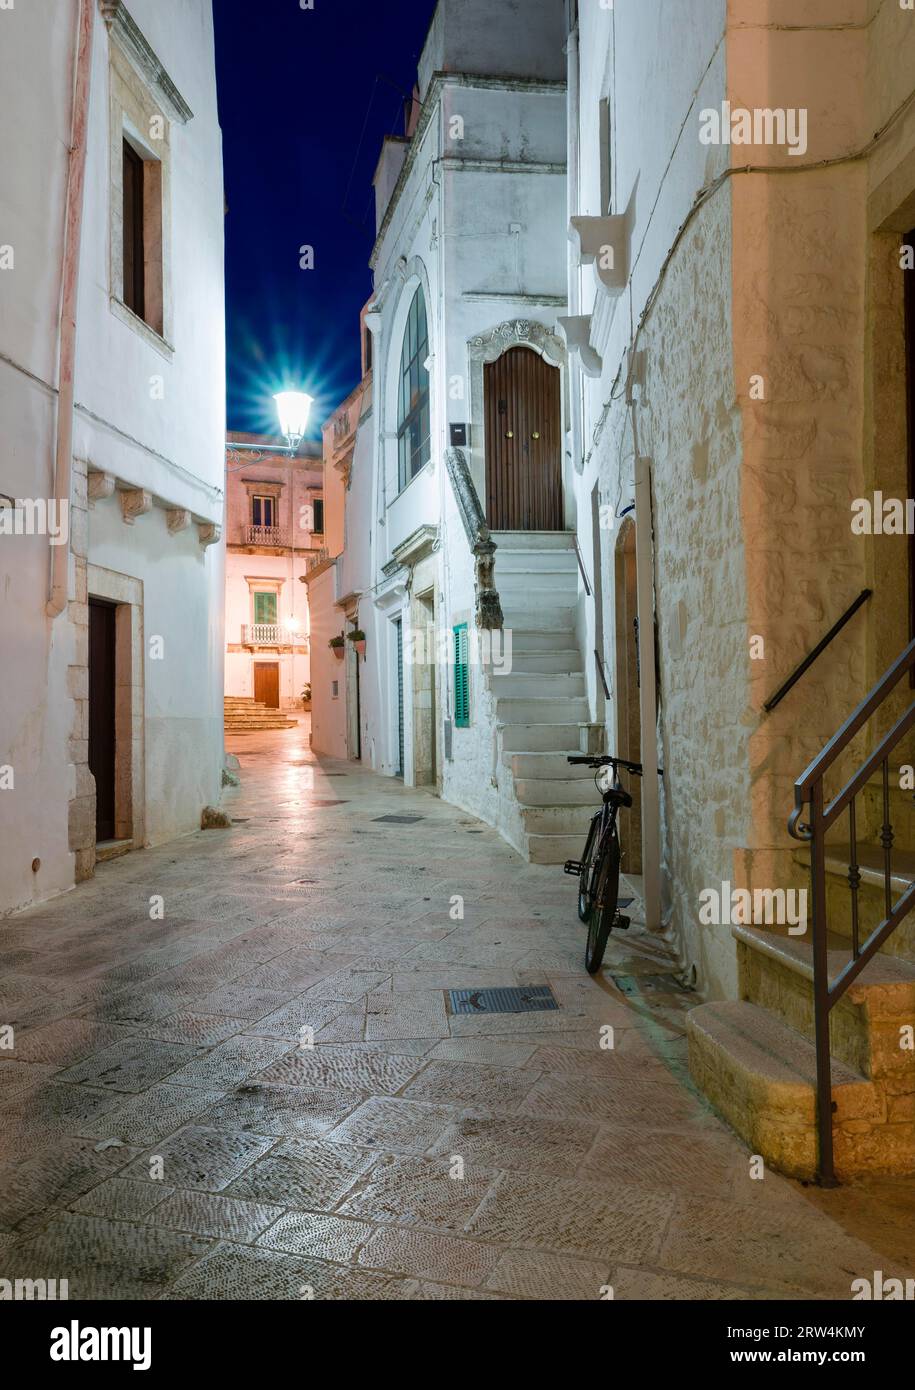 Blue hour, alley with bicycle, winegrowing town, Locorotondo, Valle d?Itria, Trullo Valley, Apulia, Puglia, Italy Stock Photo